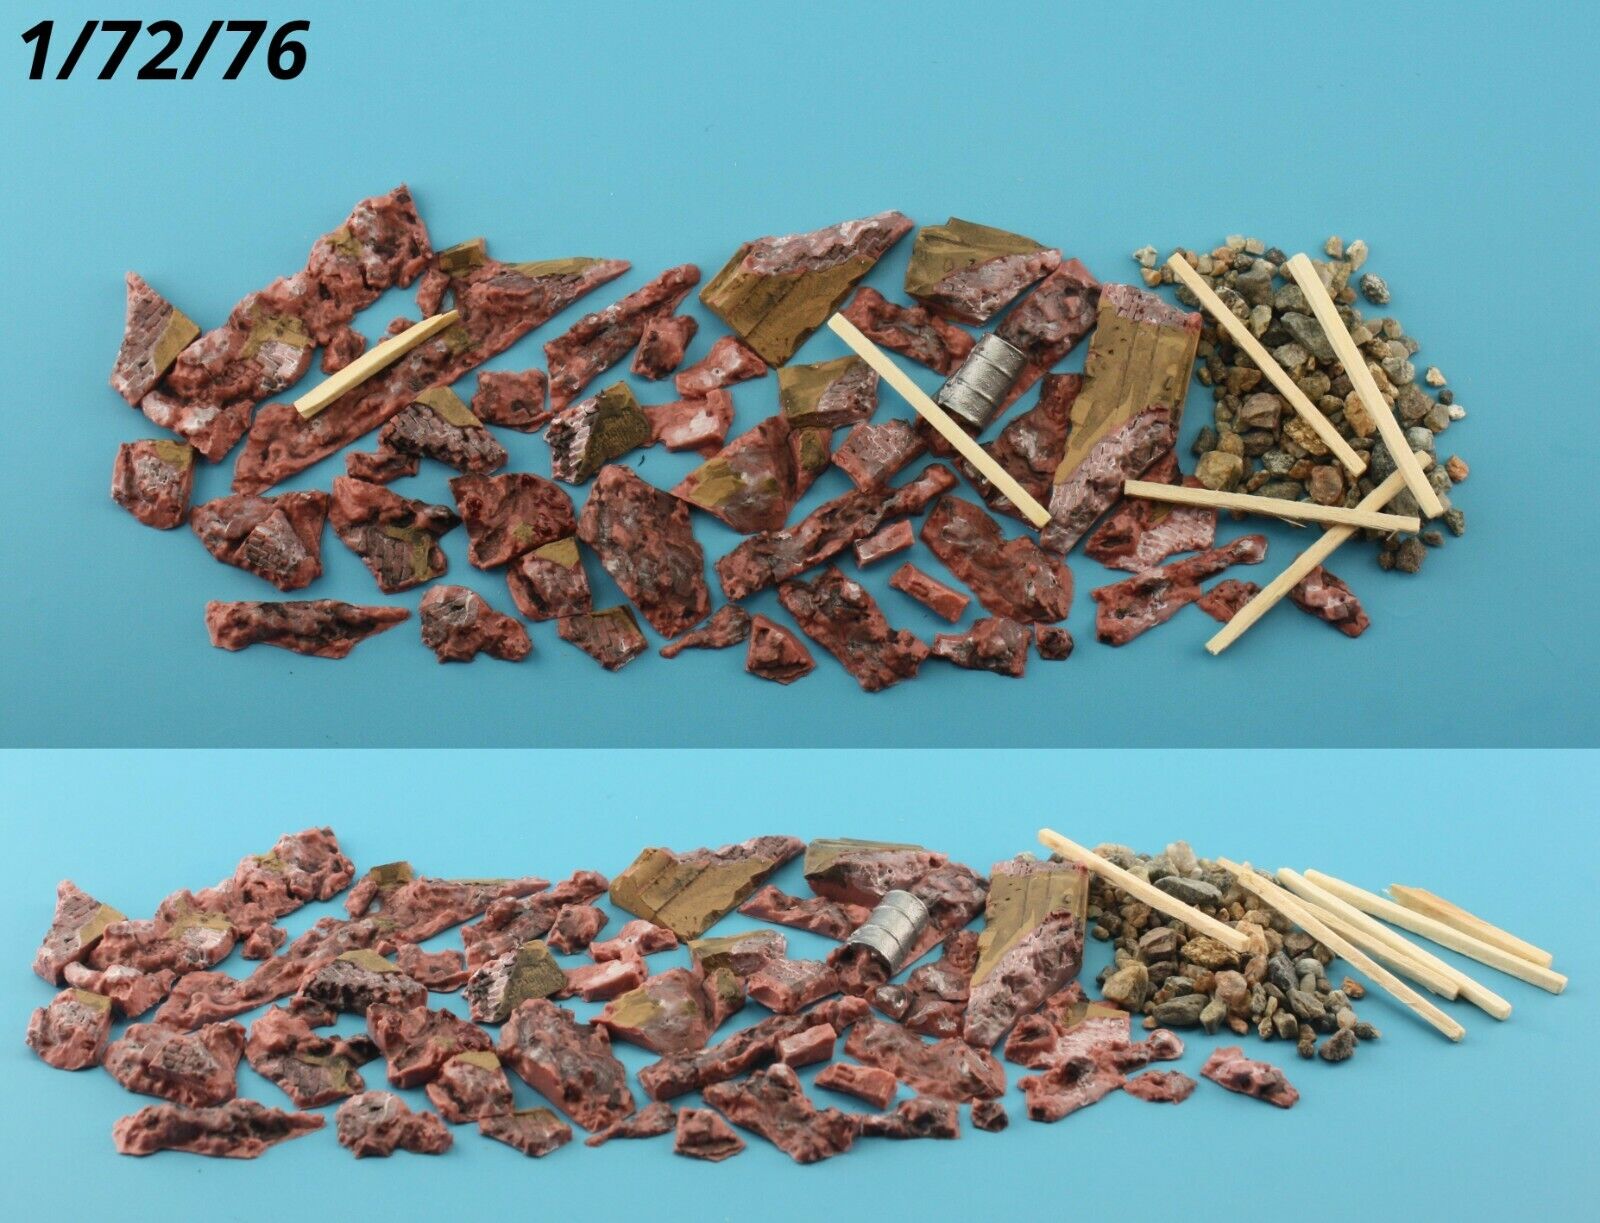 Redog 1:72/76 Big Rubble Debris Pile for Dioramas and Scale Model Bases - redoguk